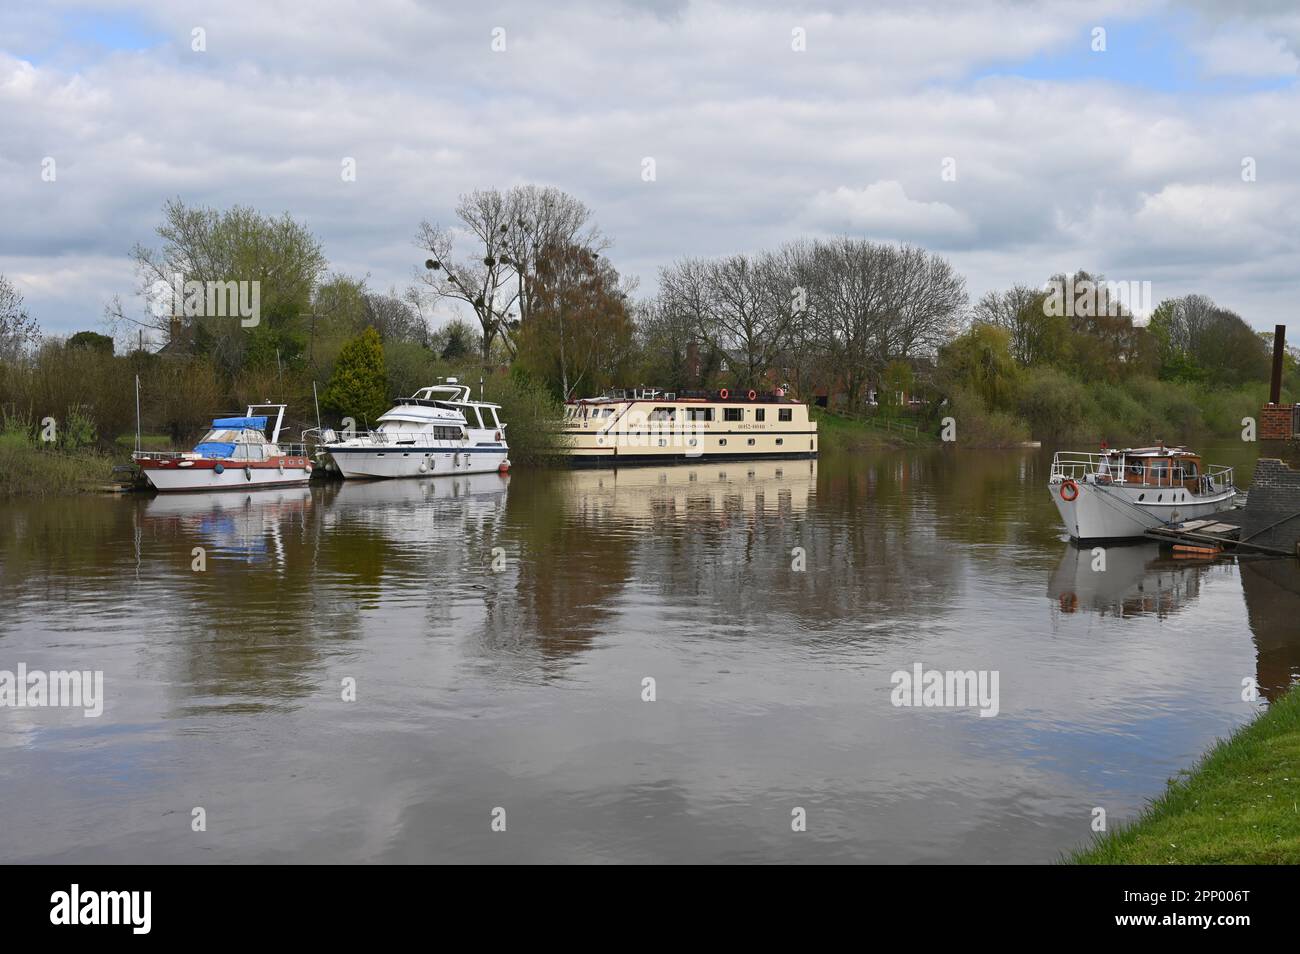 Boats moored on the bank of the River Severn as it passes through the Worcestershire town of Upton on Severn Stock Photo